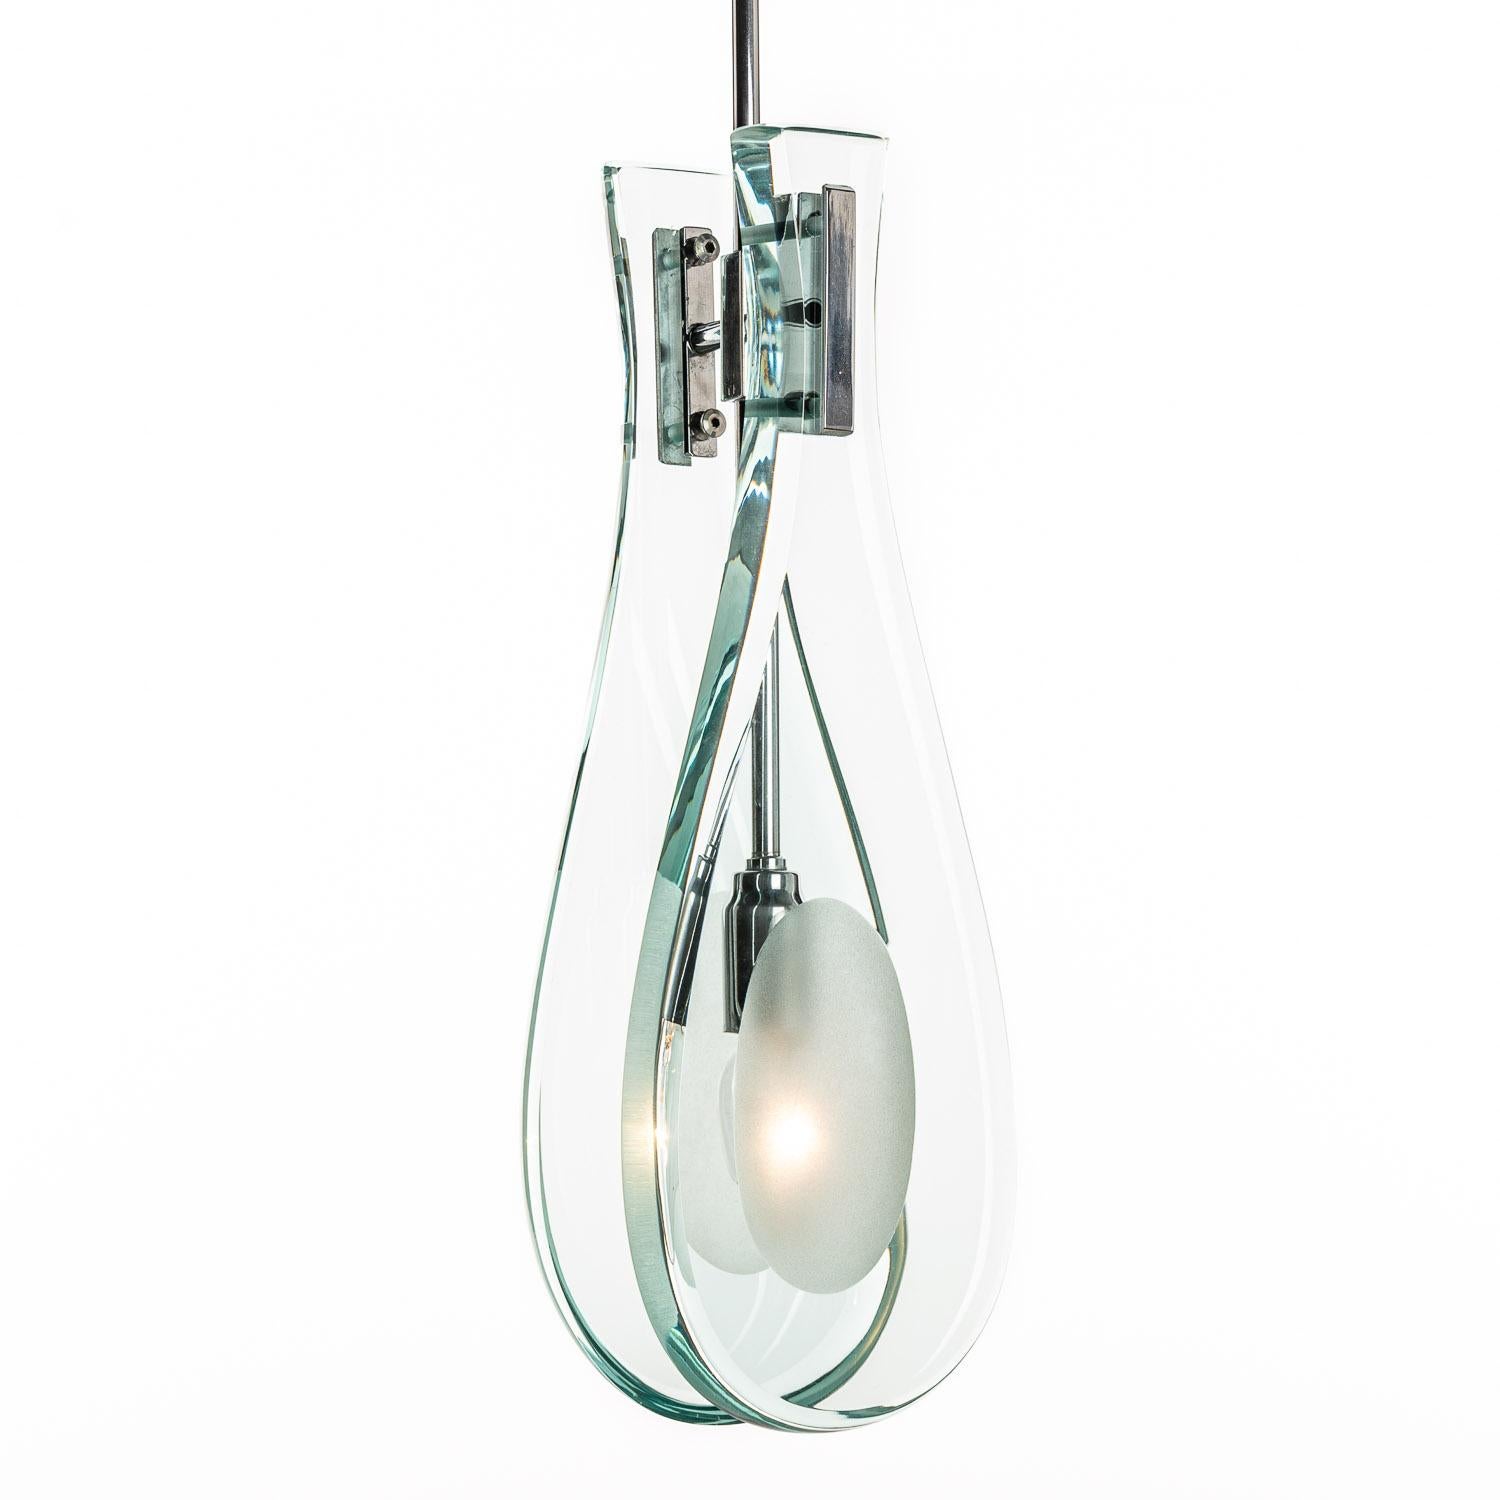 Classic drop-shaped pendant designed by Max Ingrand.
Two thick and heavy glass panels with frosted glass center to diffuse the single E14 lightbulb. 
We als have one with brown/yellow tone glass panels and a large pendant with not one but with 